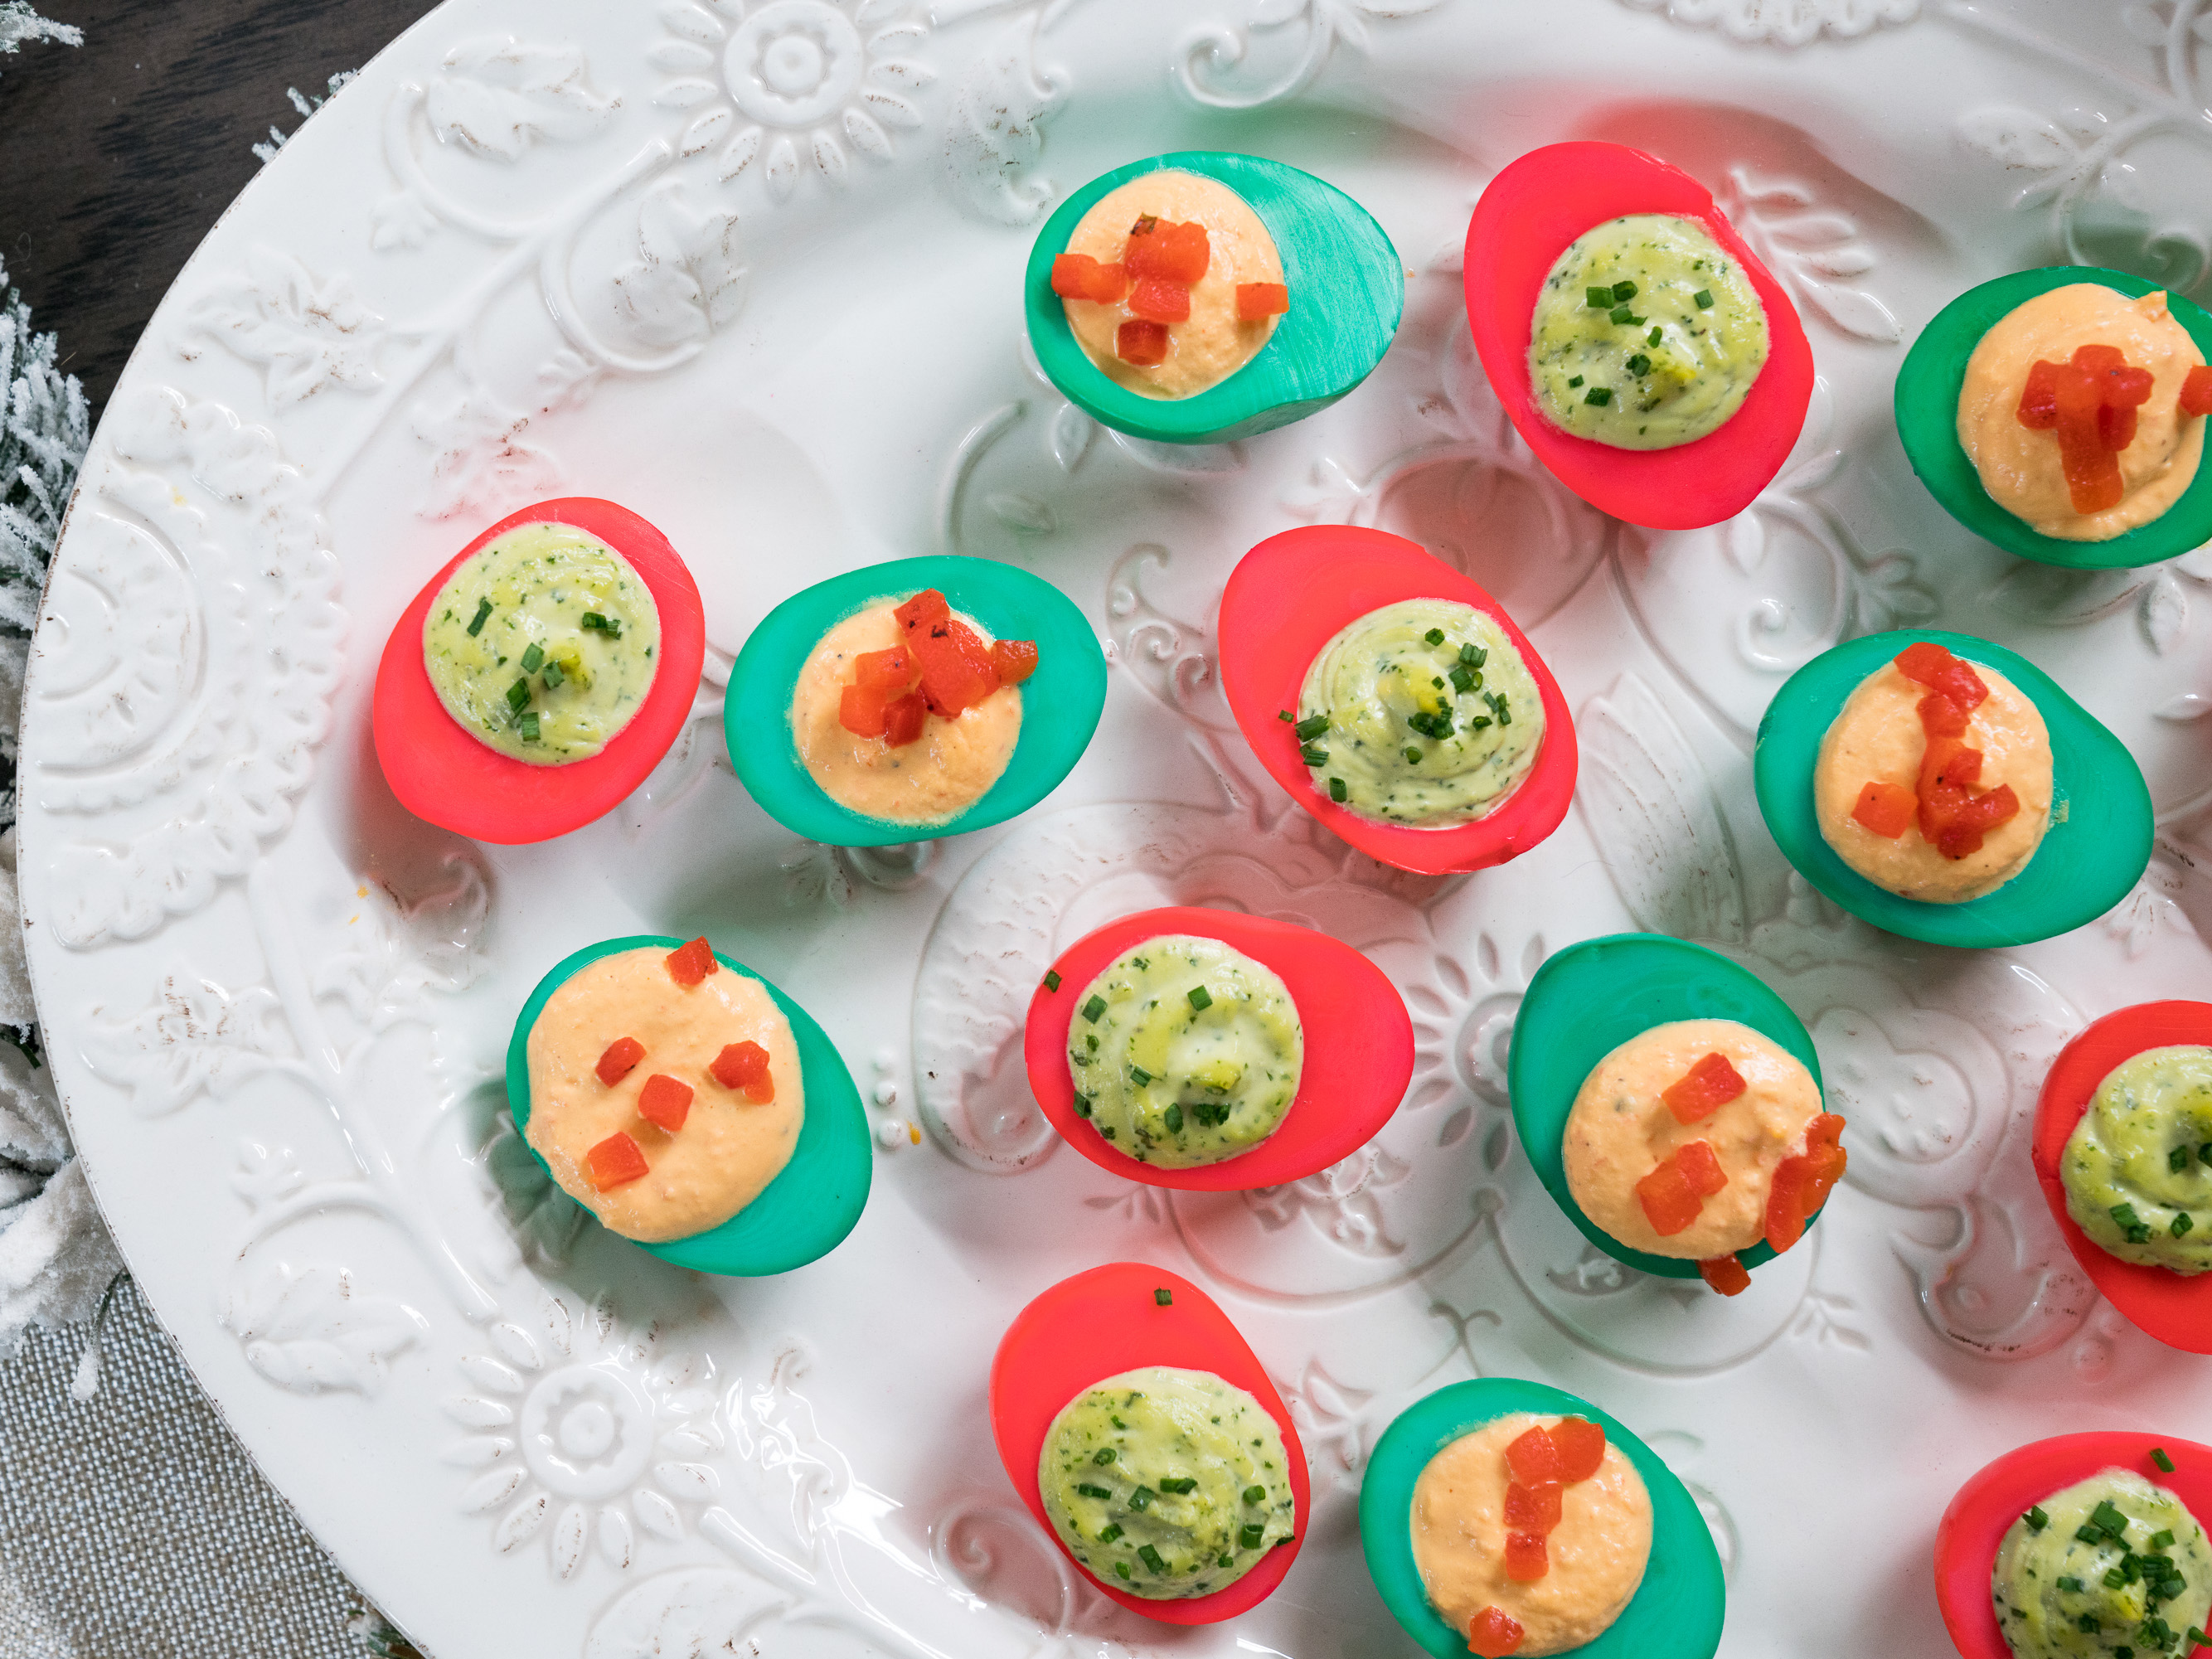 https://www.foodnetwork.com/content/dam/images/food/fullset/2017/8/14/0/YW1013H_Holiday-Deviled-Eggs_s4x3.jpg